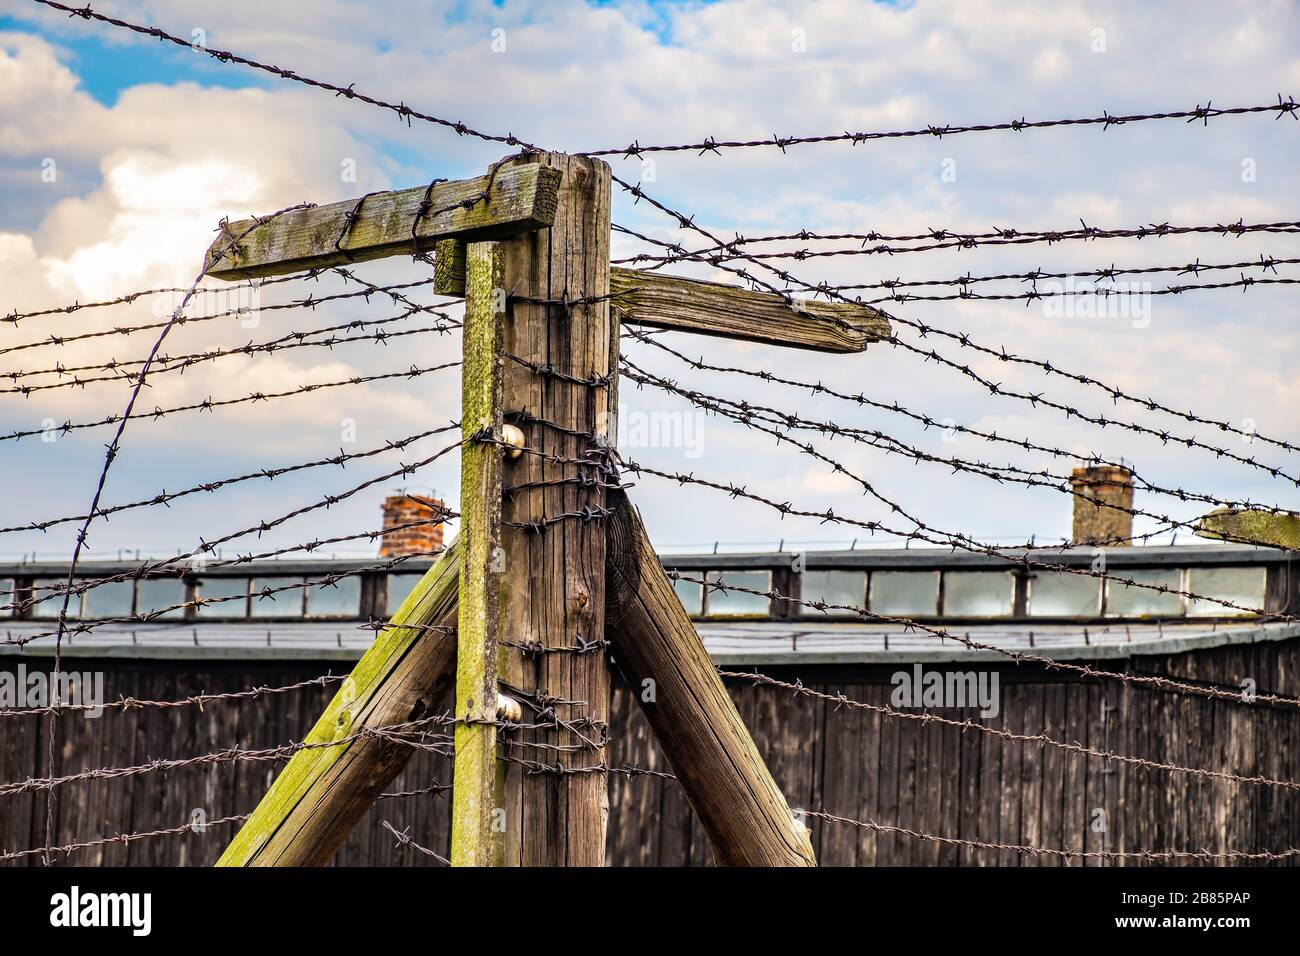 Lublin, Lubelskie / Poland - 2019/08/17: Barbed-wire fences of the Majdanek KL Lublin Nazis concentration camp - Konzentrationslager Lublin Stock Photo